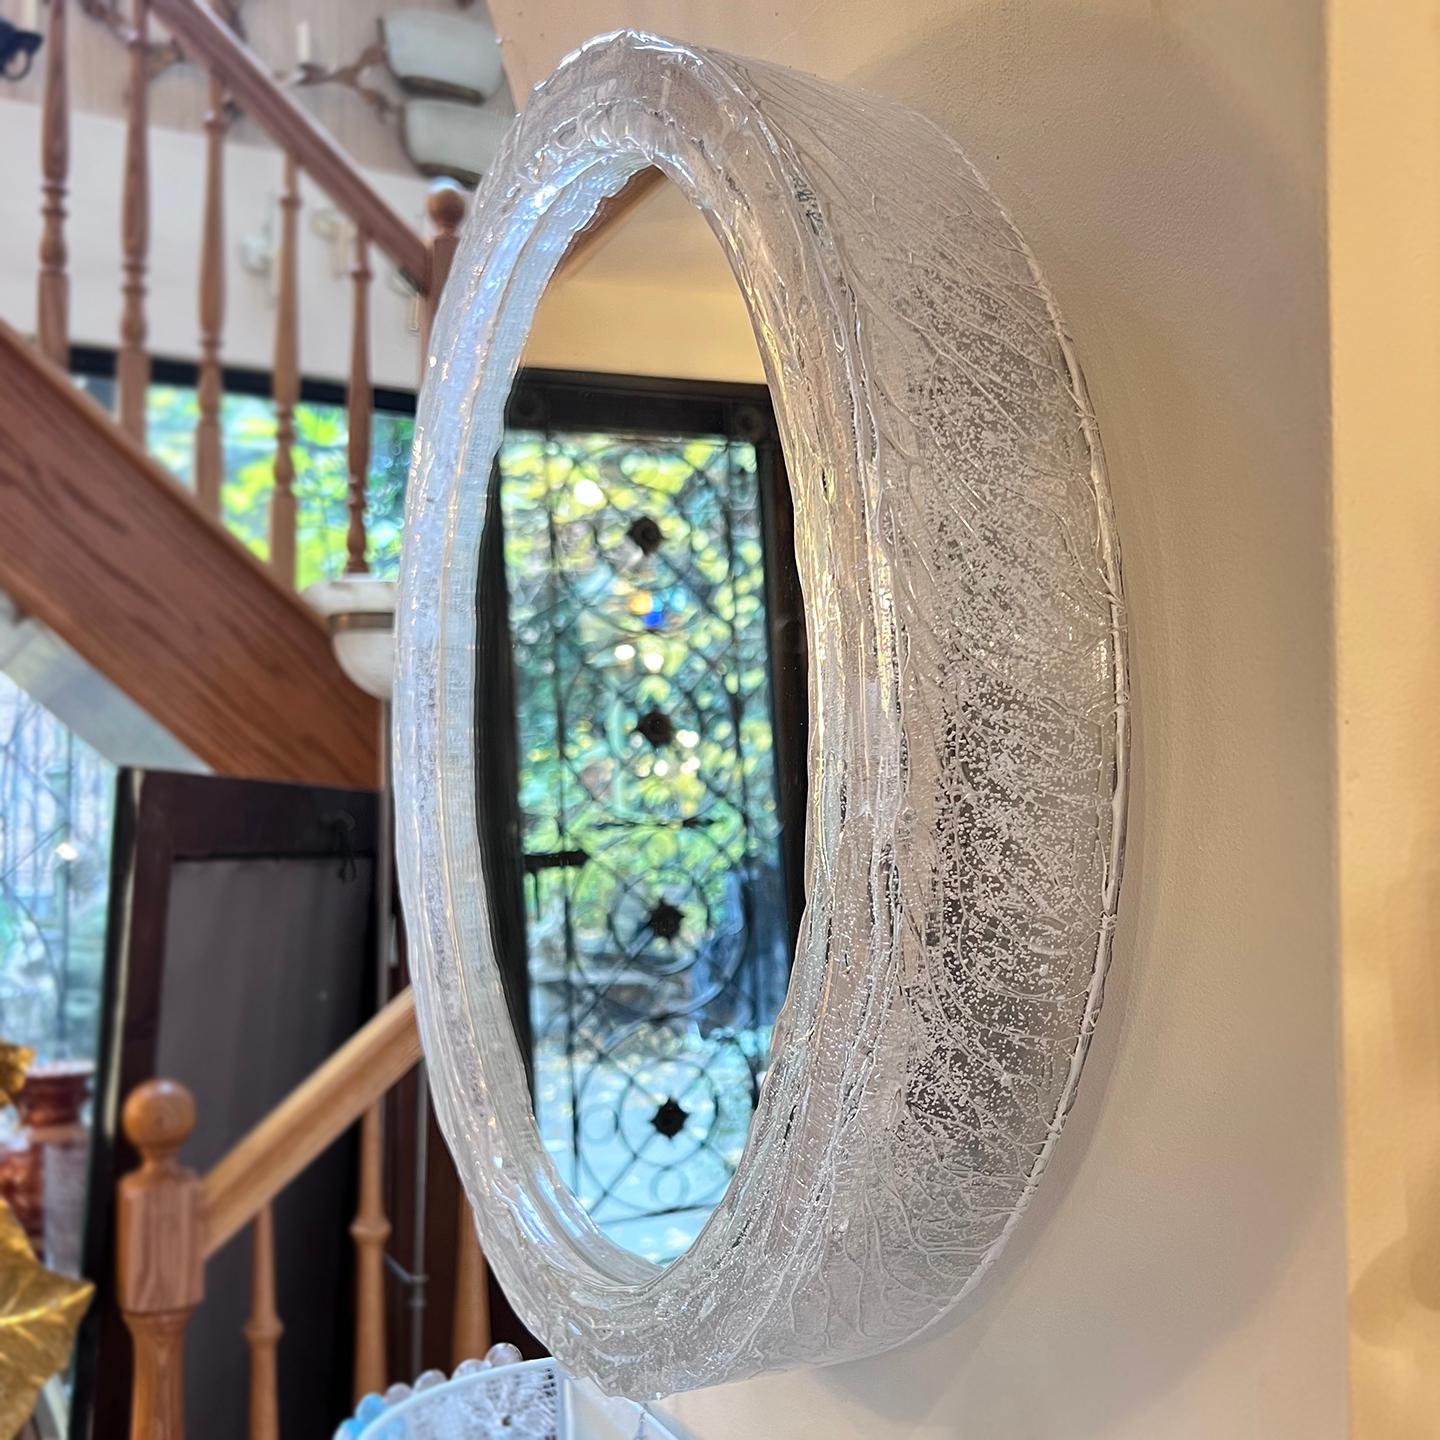 Circa 1960’s French Moderne style mirror in textured resin frame and interior lights.

Measurements:
Diameter: 19.25?
Depth: 3.25?.